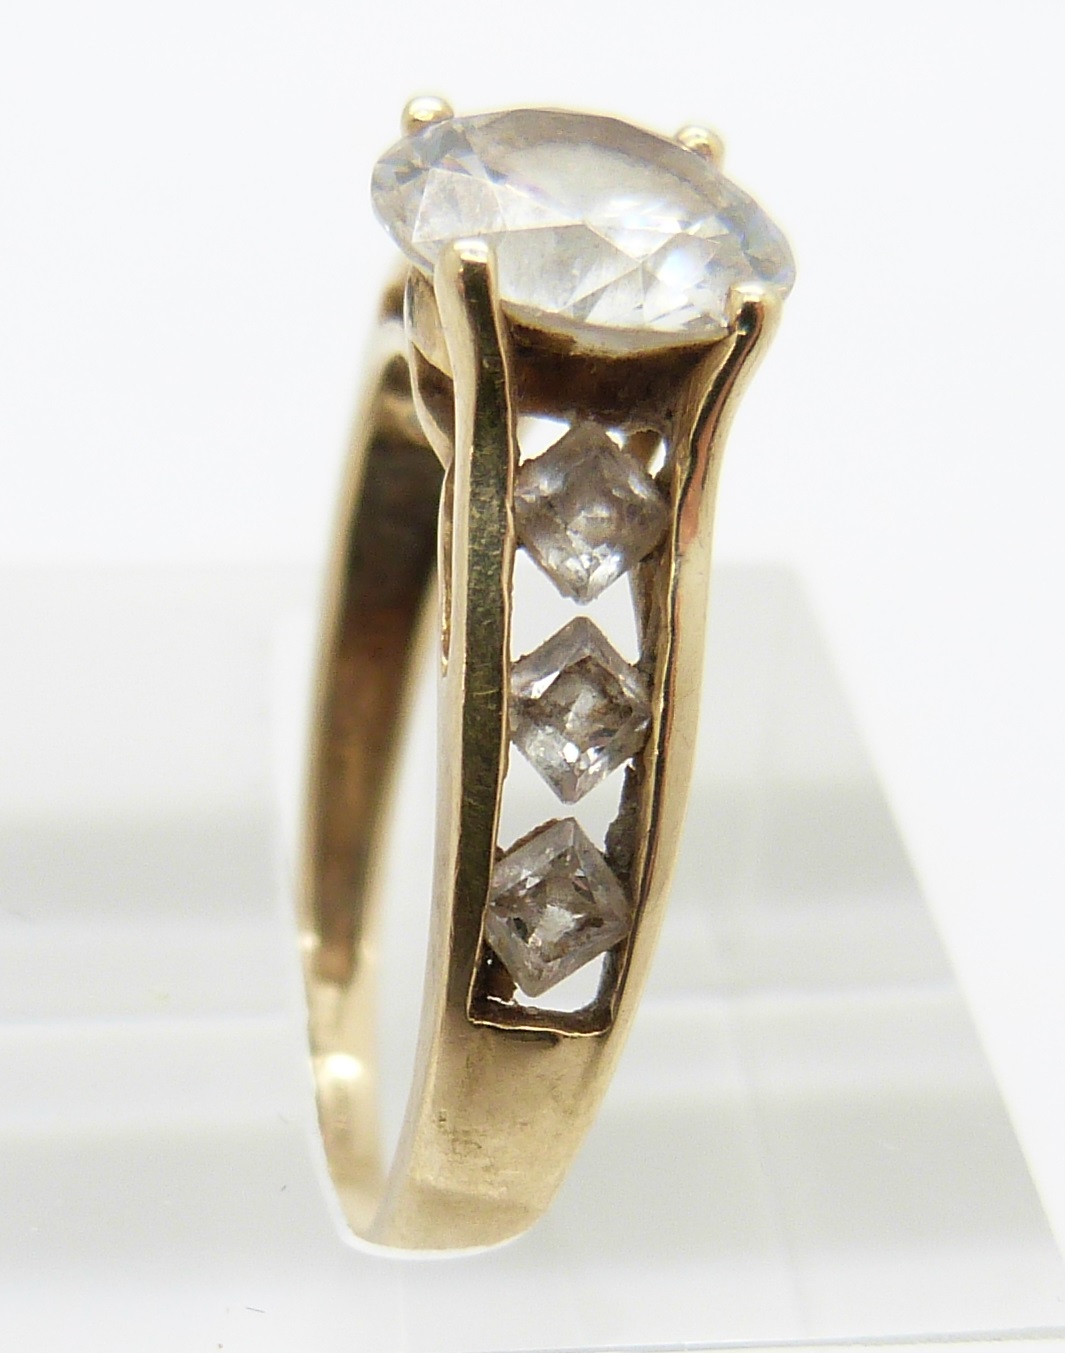 A 9ct gold ring set with topaz and a 9ct gold ring set with cubic zirconia, 5.7g - Image 5 of 5